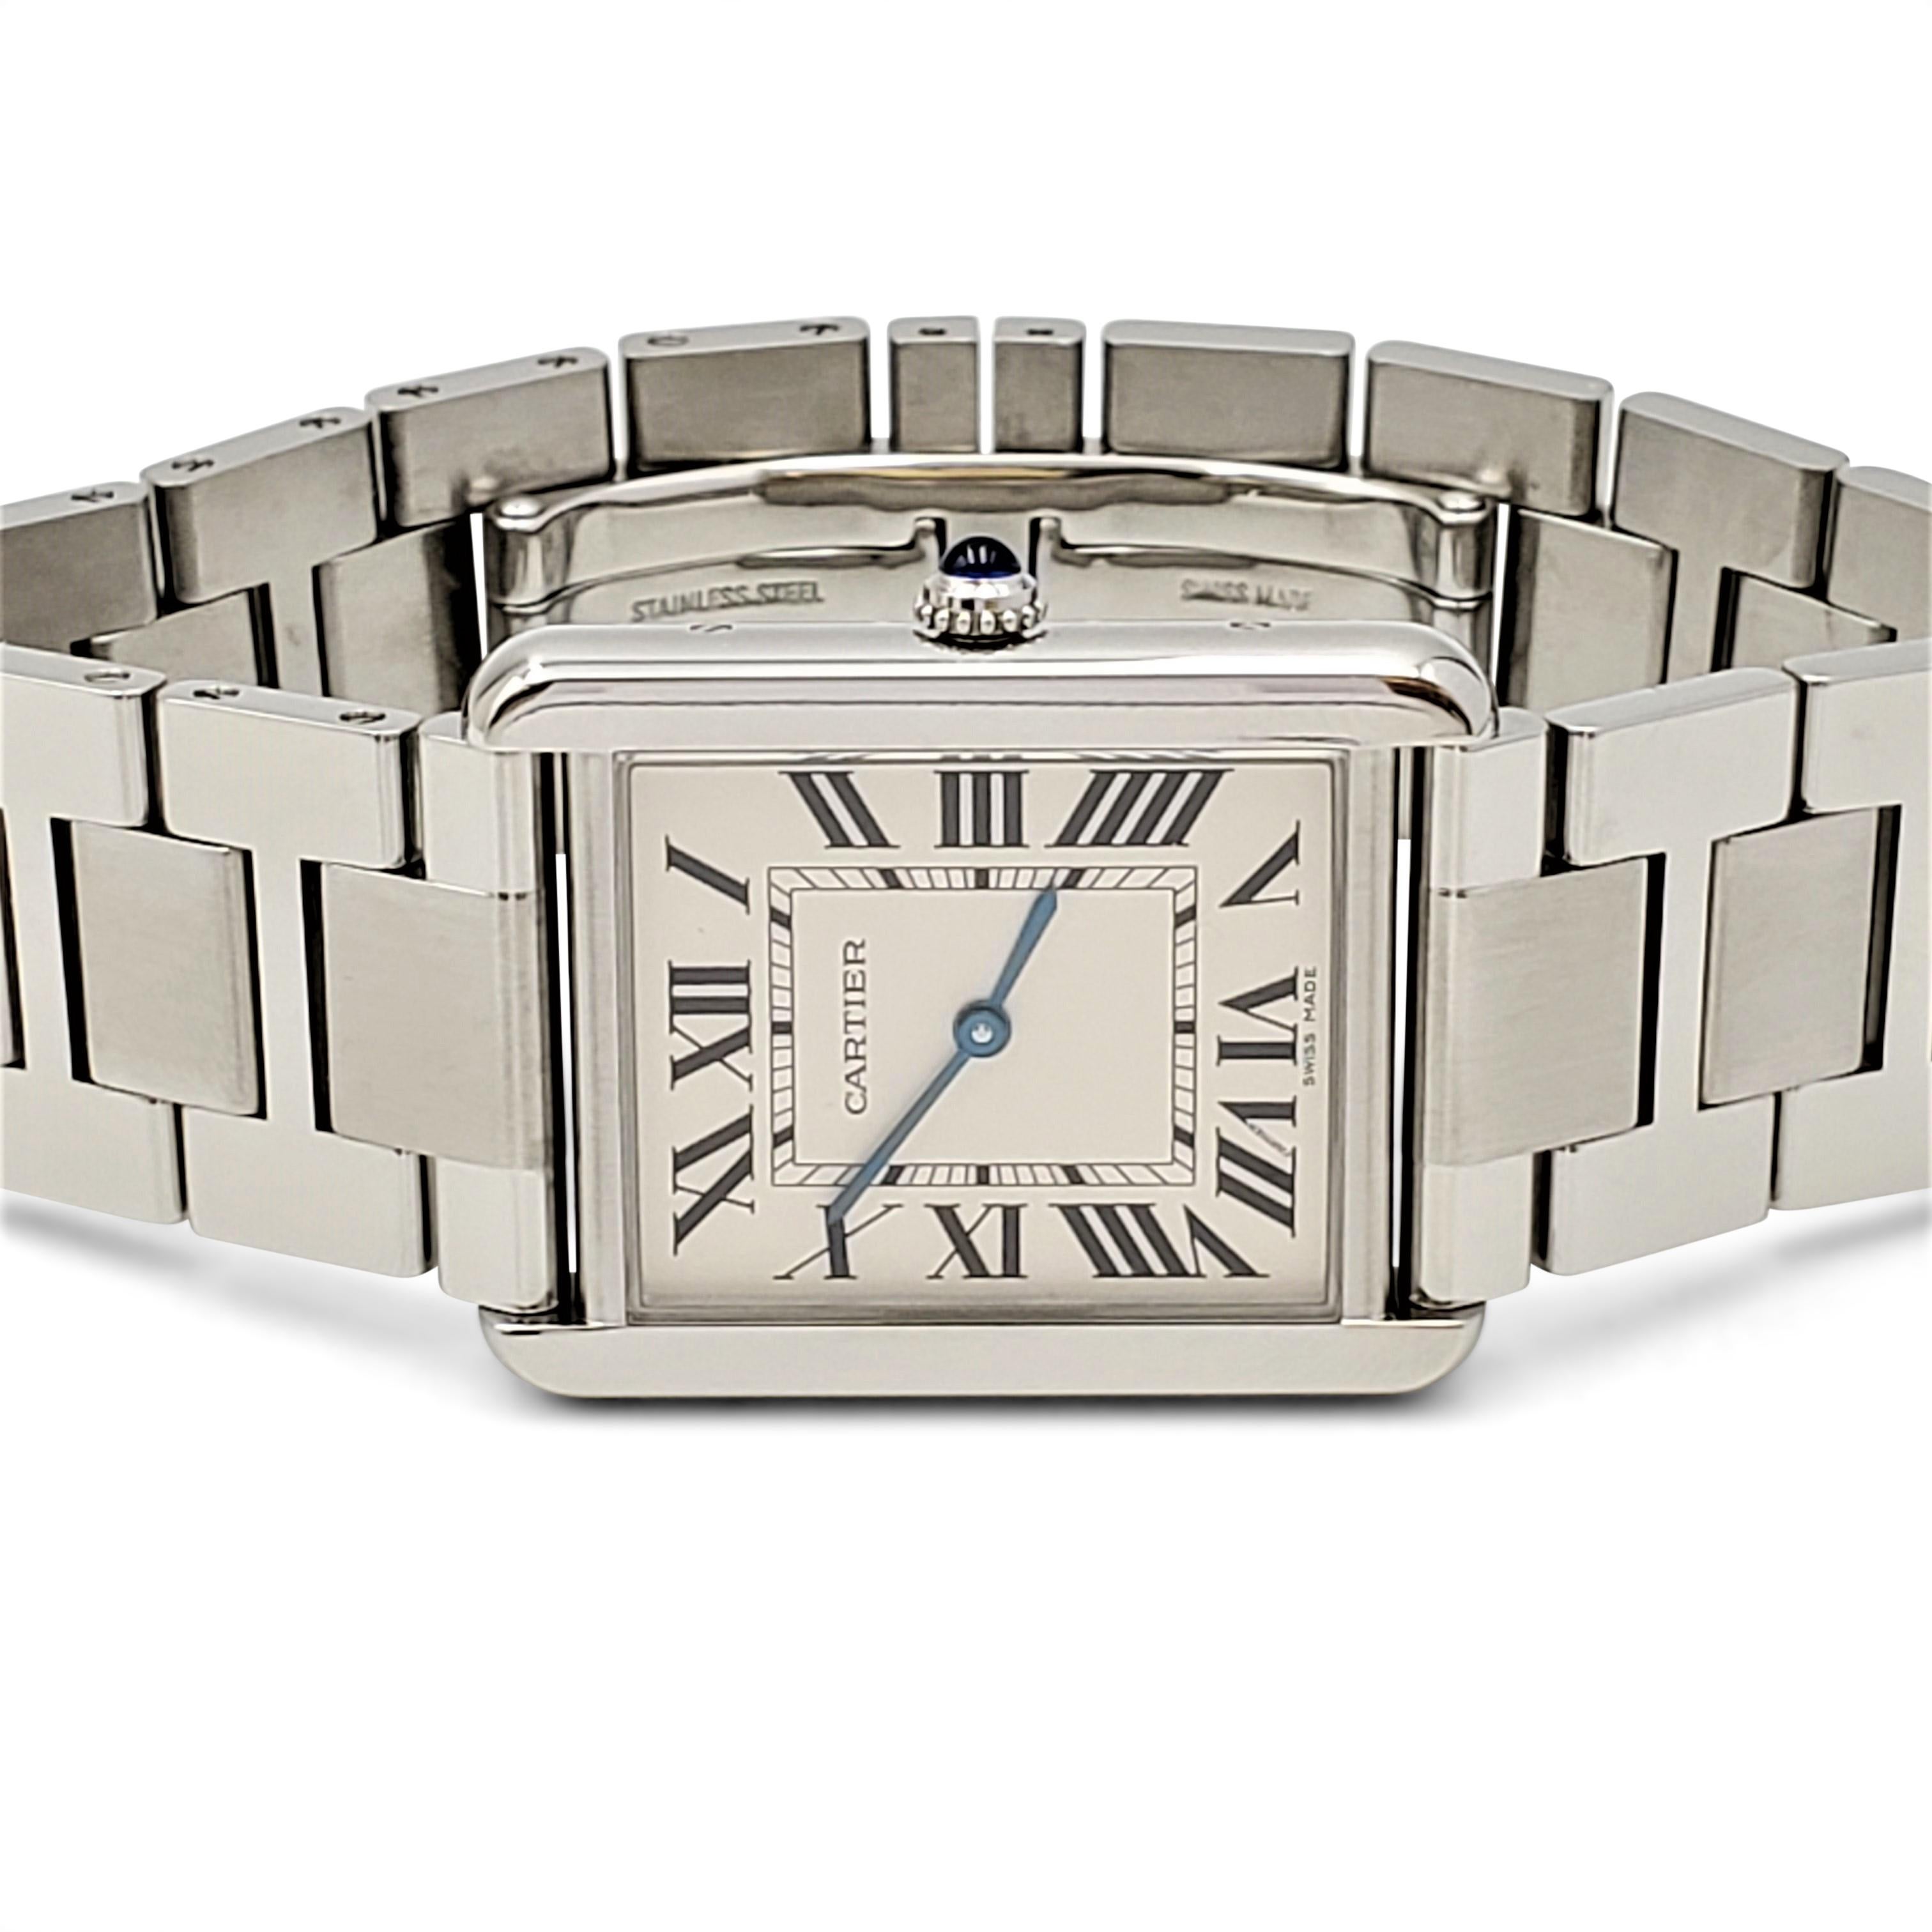 Authentic Cartier 'Tank Solo' watch crafted in stainless steel featuring a sleek rectangular case measuring 34.8 mm x 27.4 mm. The silvered opaline dial is completed with Roman numerals, blued-steel sword-shaped hands, and a sapphire crystal. Secret